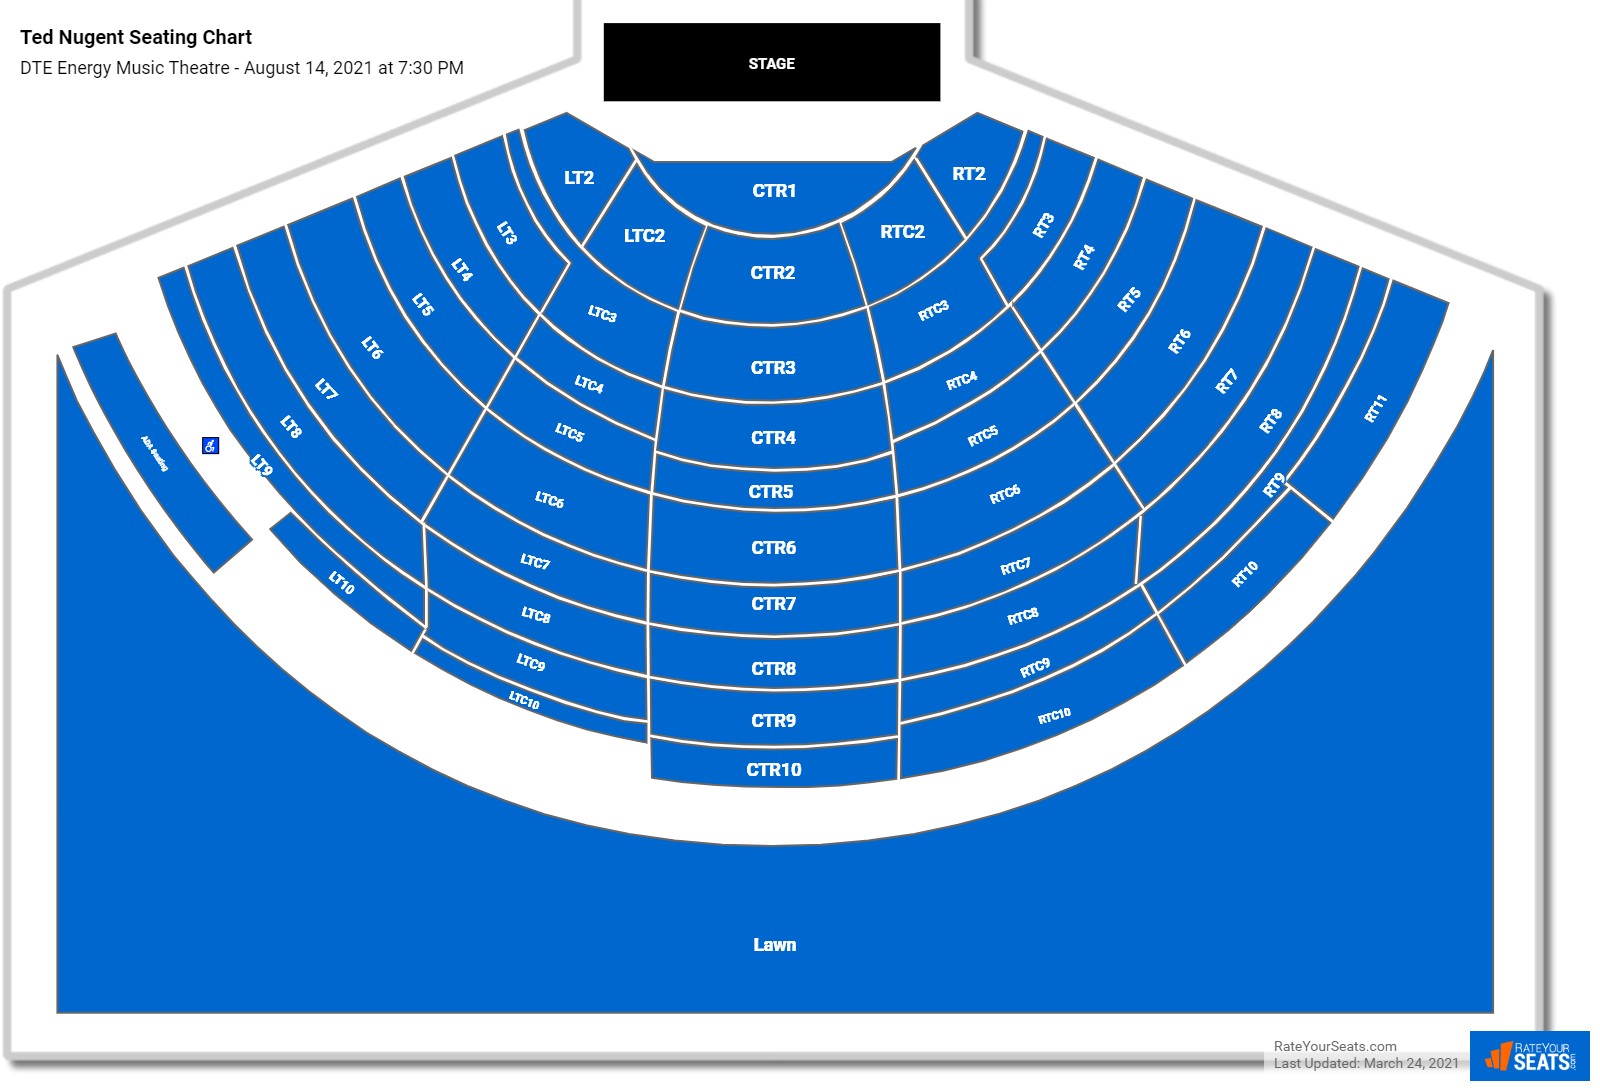 DTE Energy Music Theatre Seating Chart - RateYourSeats.com